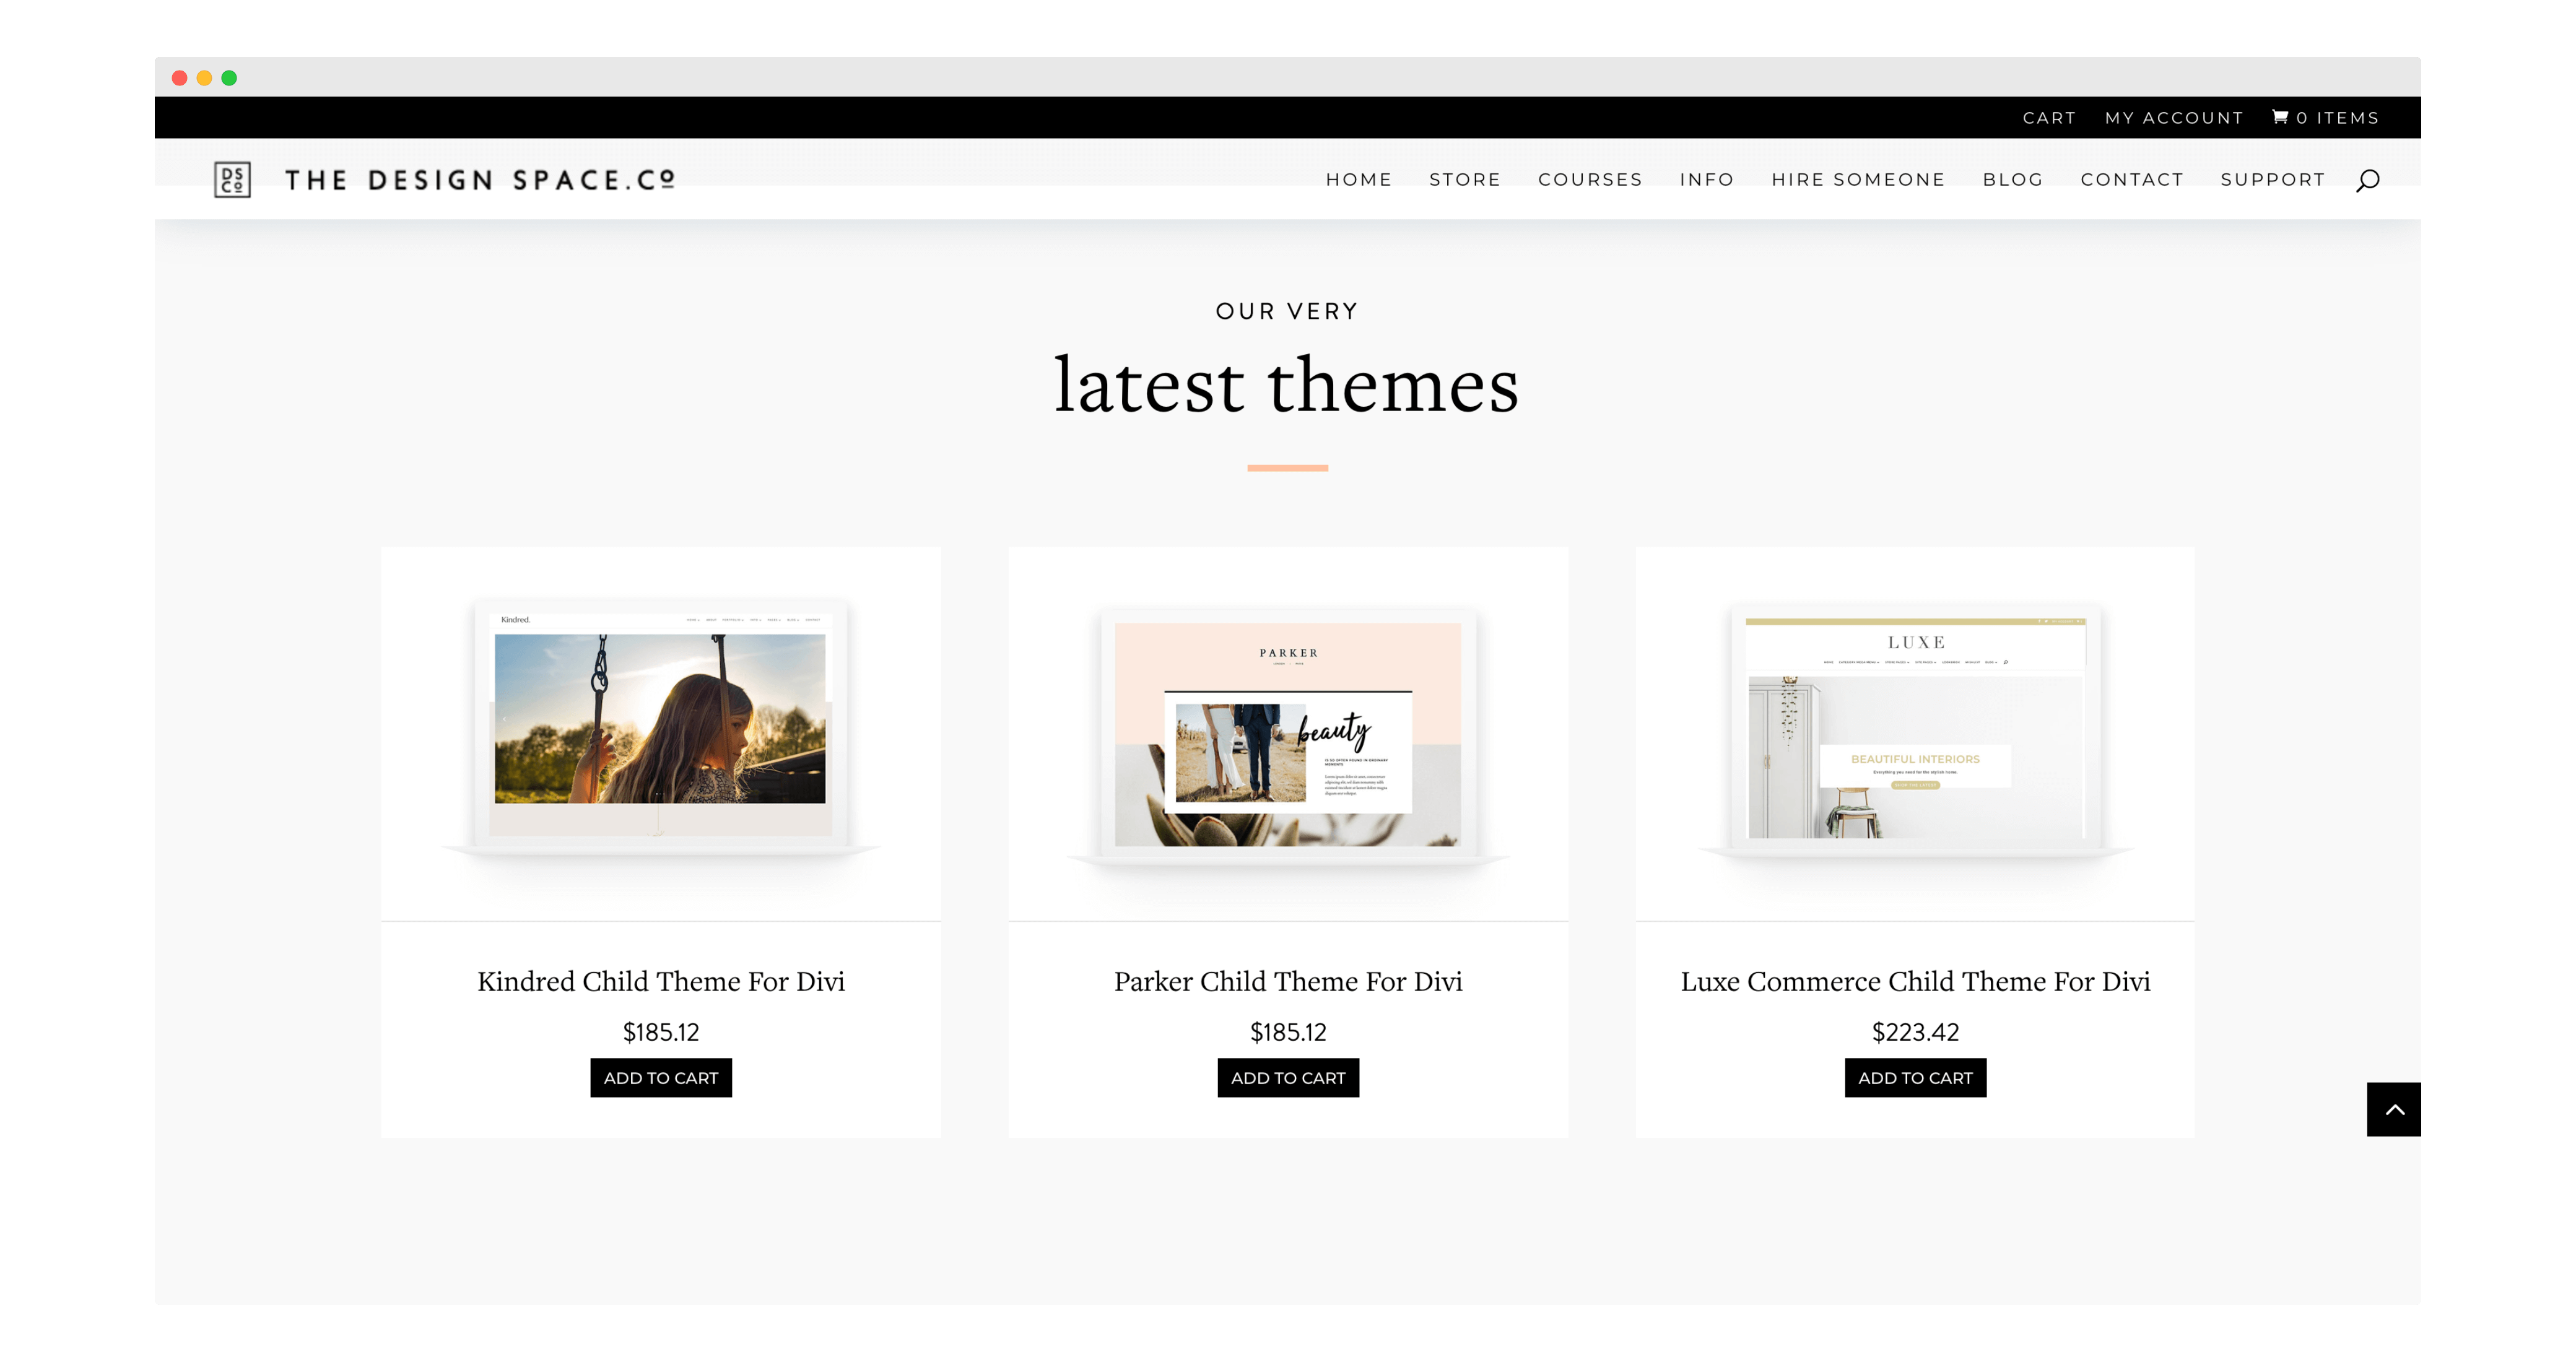 Divi Child Themes by Melissa Love